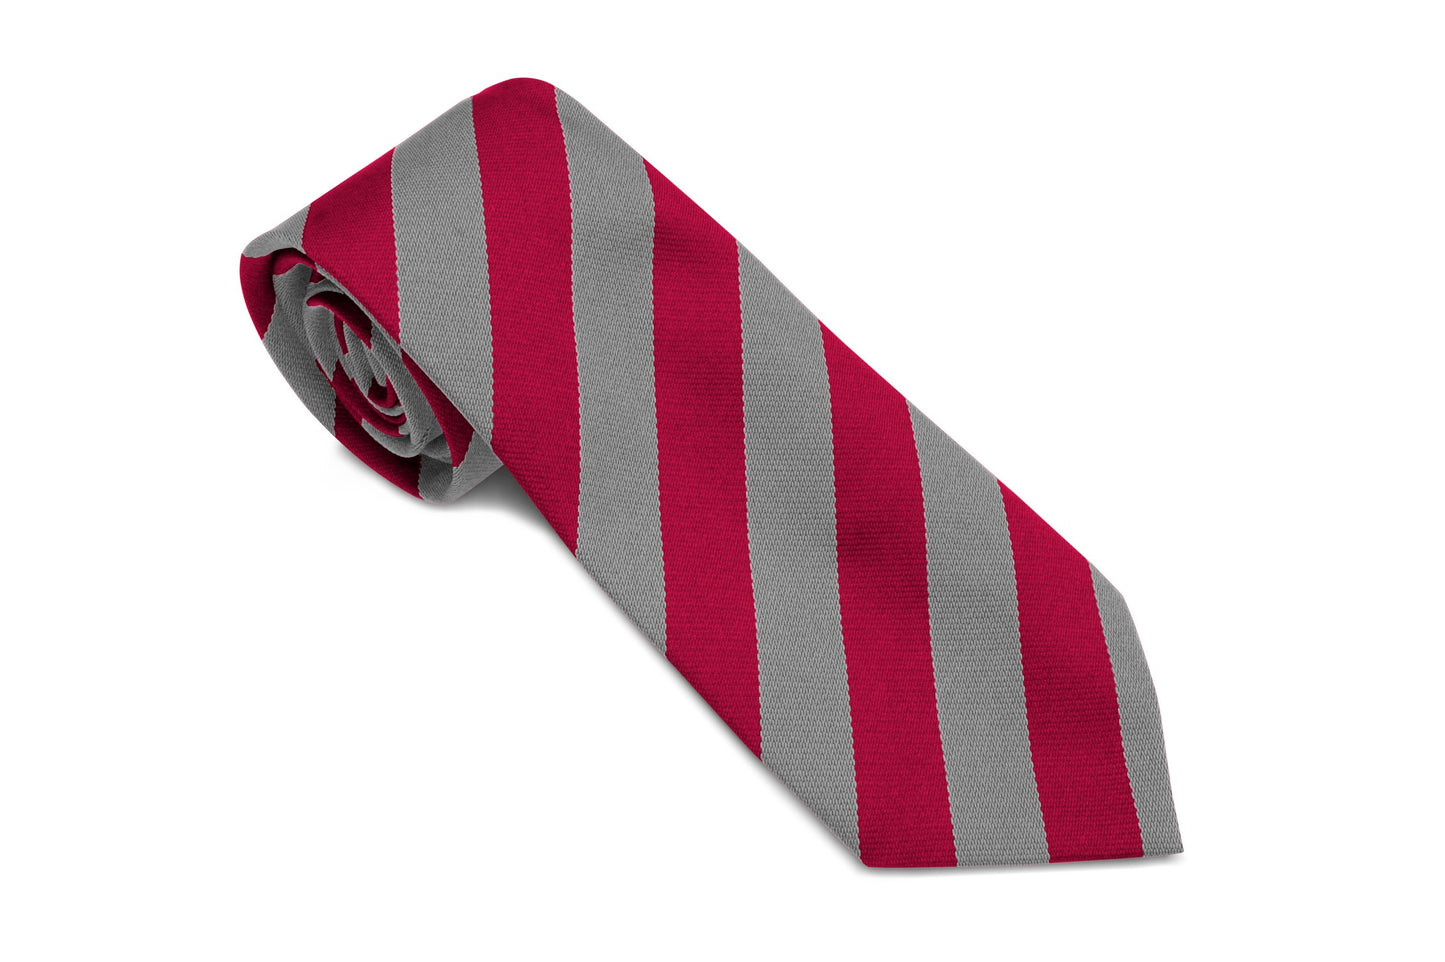 Stock Design Ties in Red and Grey Equal Stripe (5404-9509) - Lynendo Trade Store